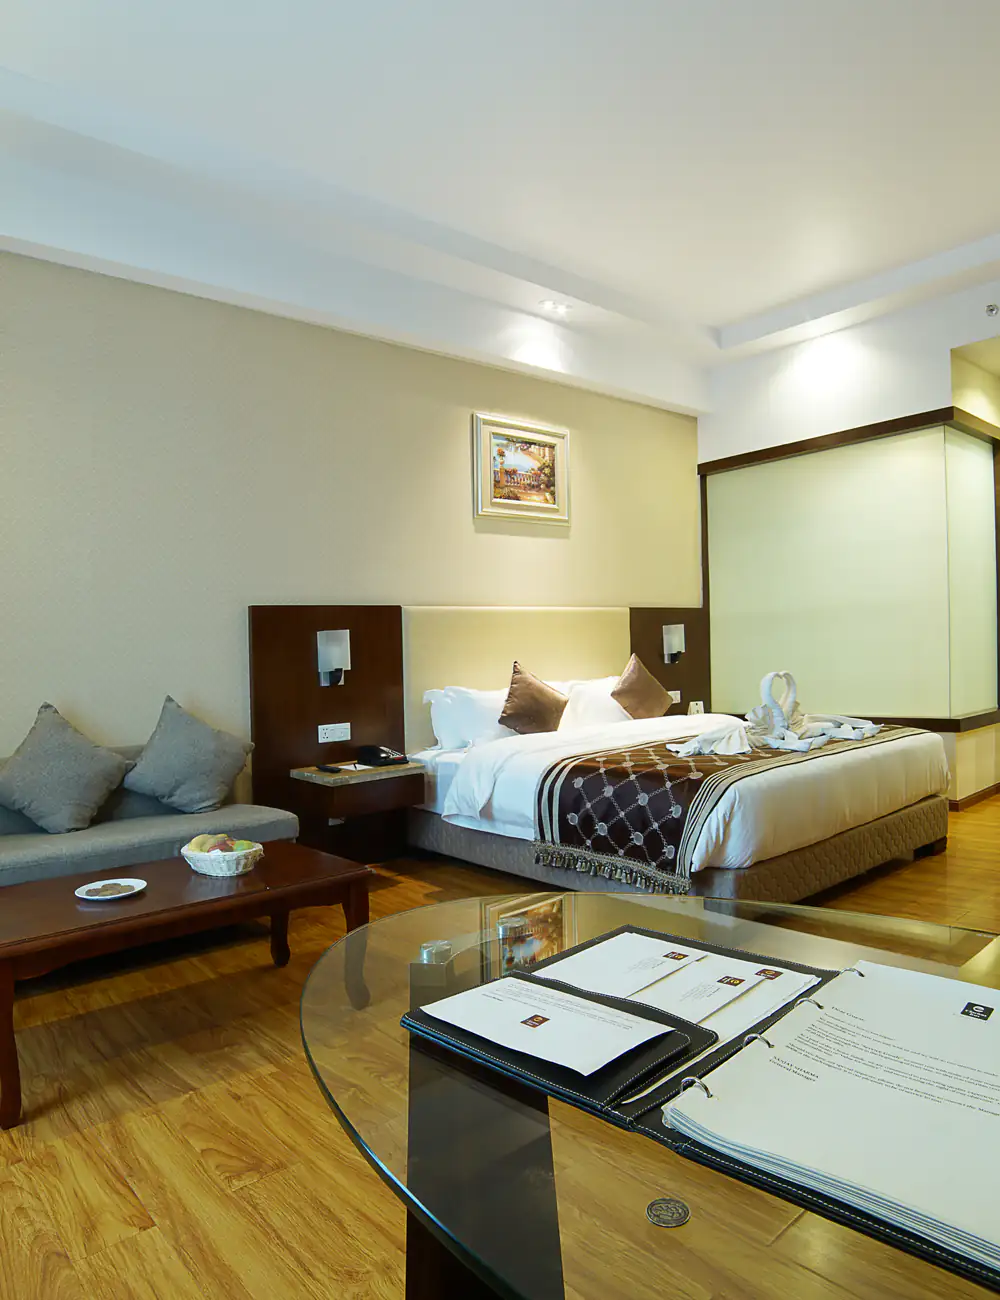 Best Place to stay in Jaipur India